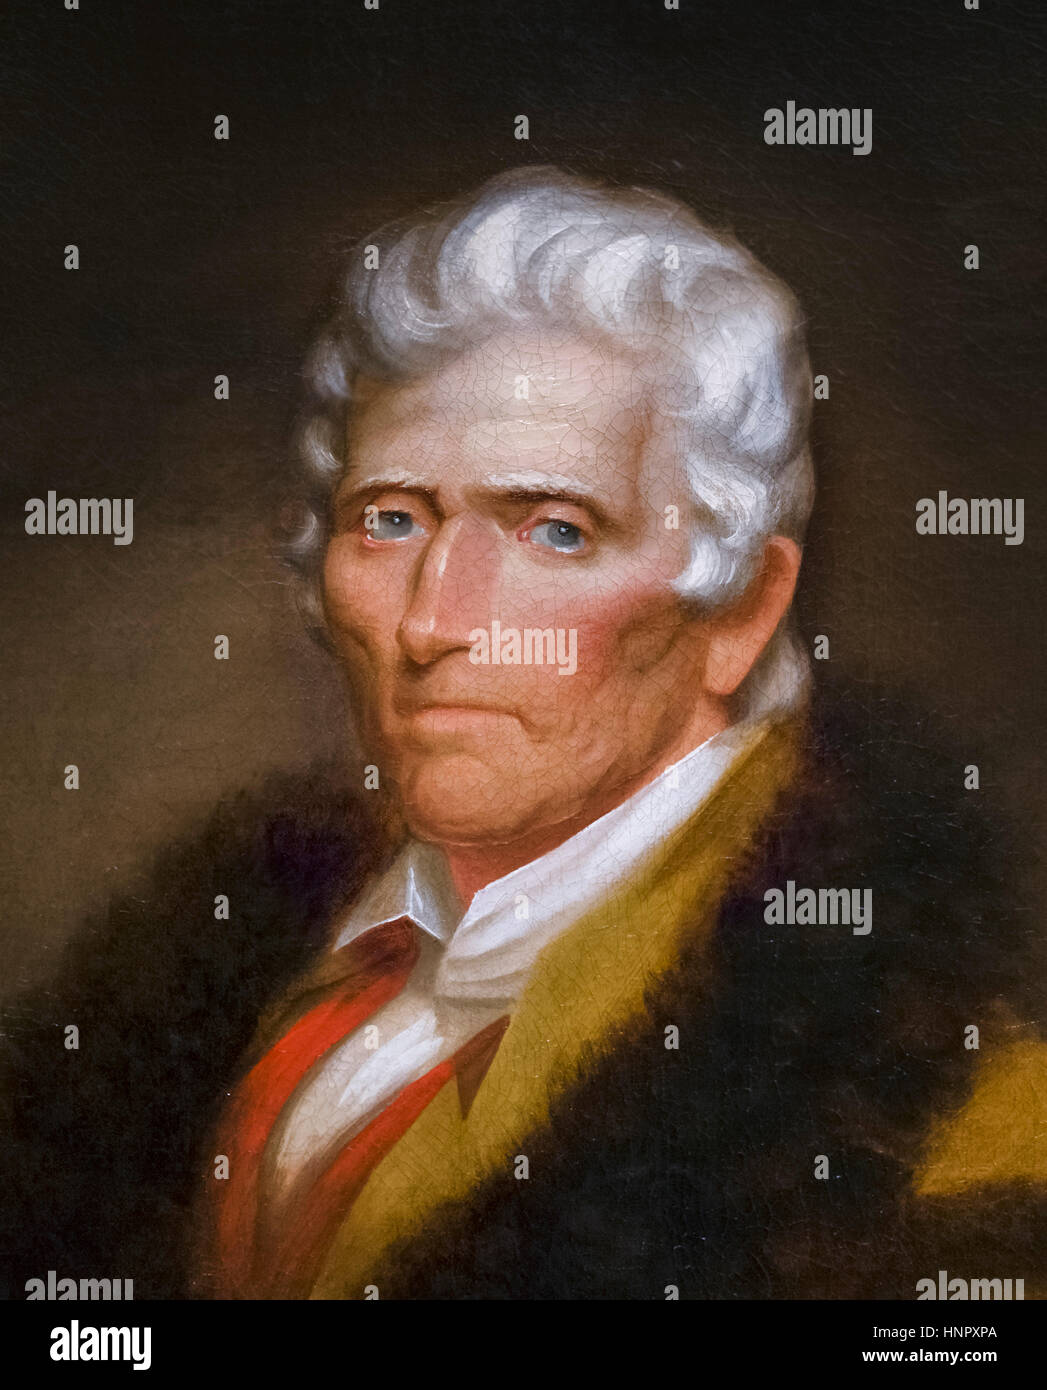 Daniel Boone (1734-1820), portrait by Chester Harding, oil on canvas, 1820. Daniel Boone was a famous American pioneer and frontiersman who became a folk hero in the United States Stock Photo